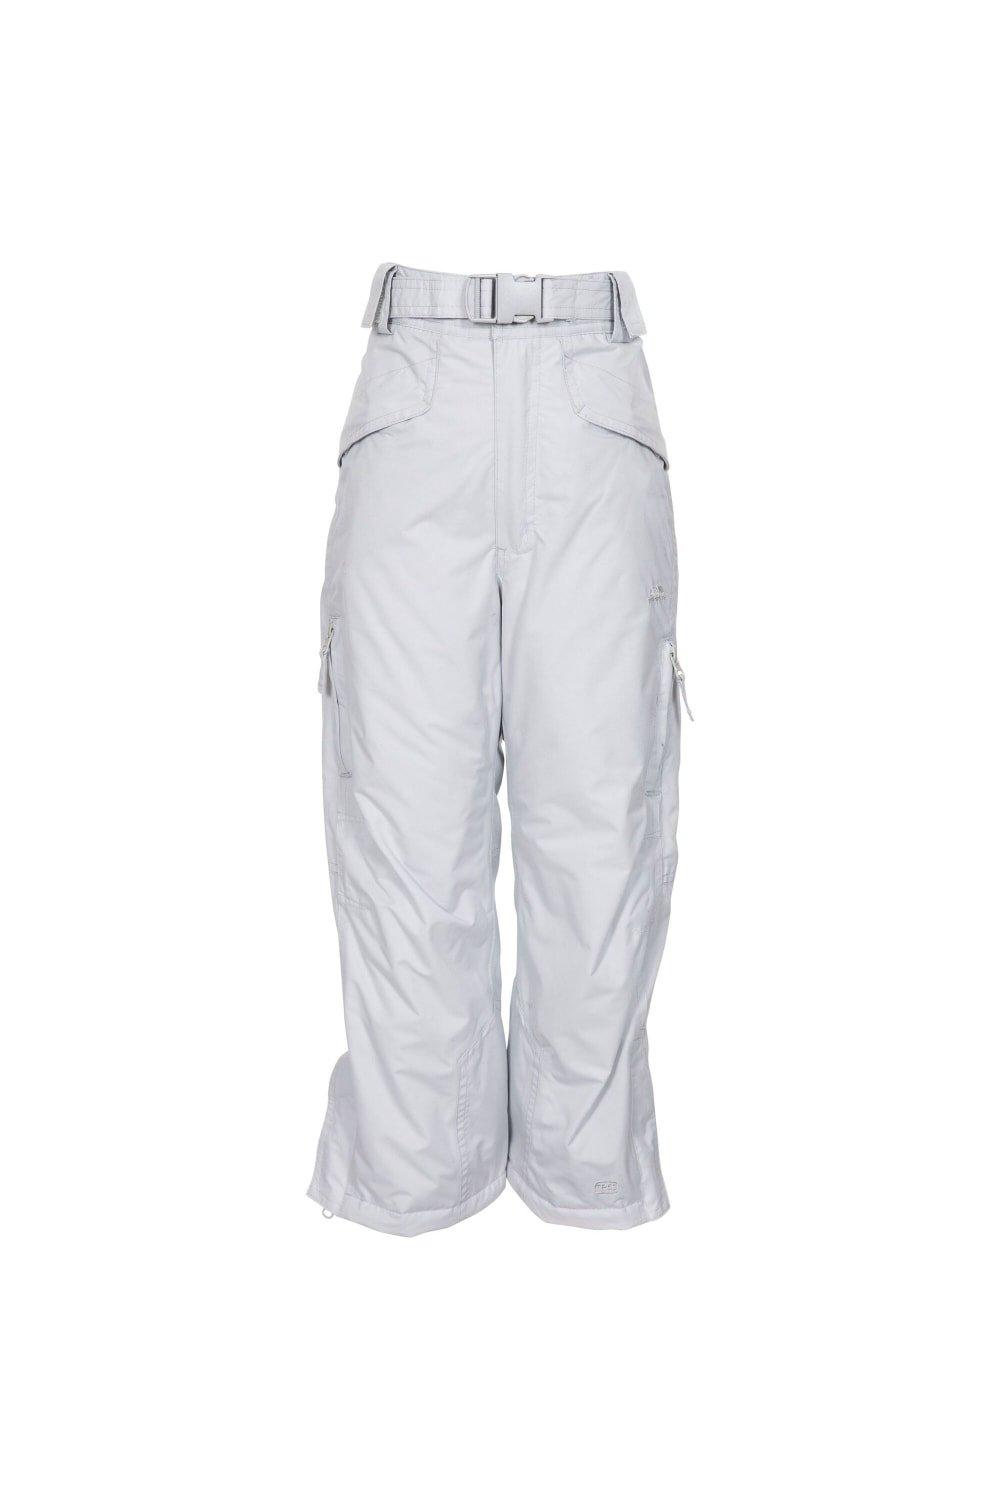 Marvelous Insulated Ski Trousers product